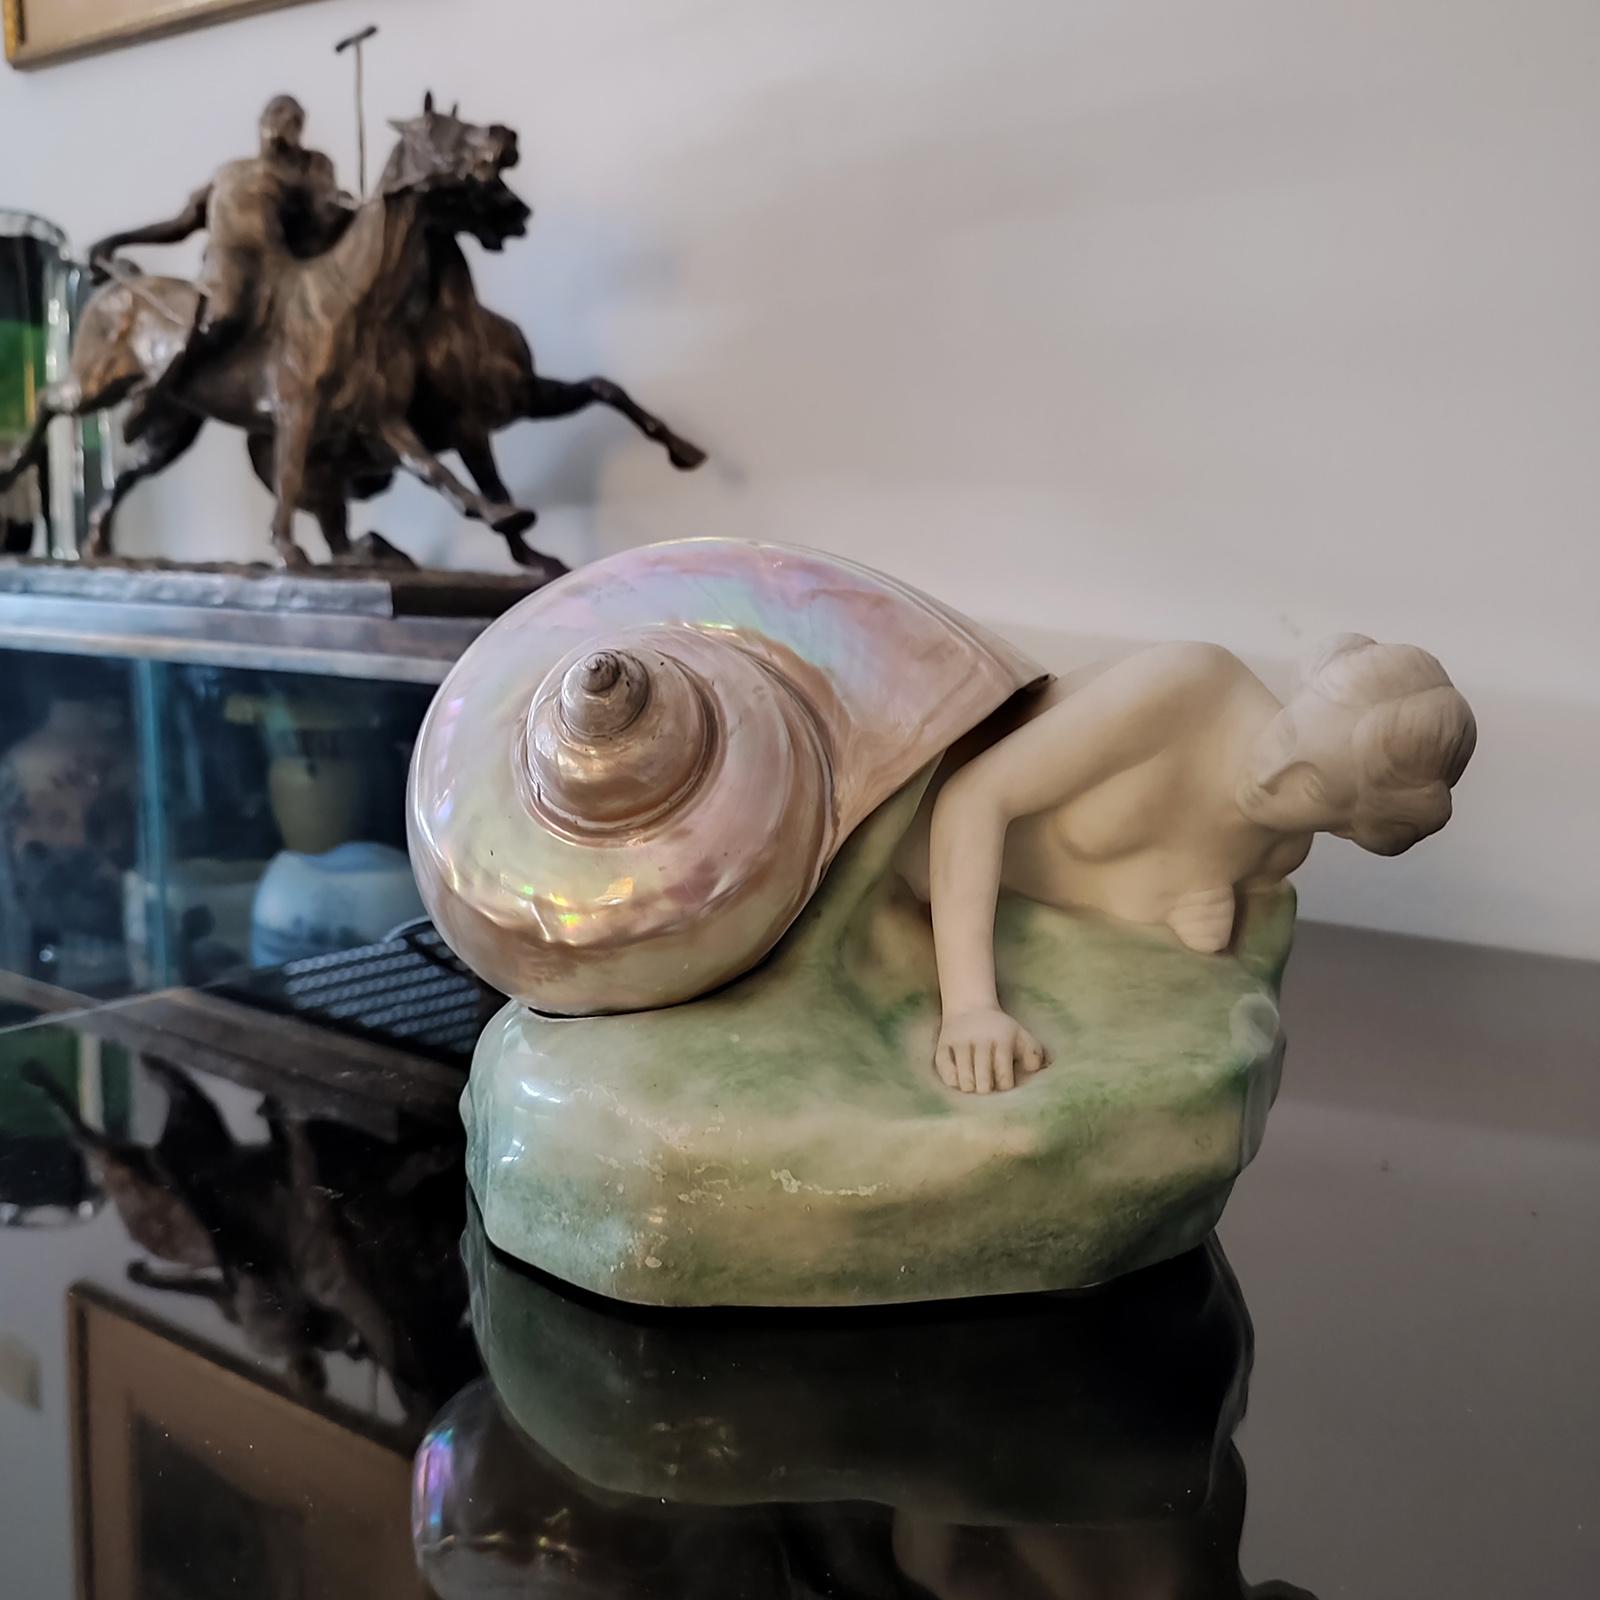 Unique Sculpture Lamp “The Snail Girl”, Berlin / Germany ca. 1910.
An alabaster and shell (turbo marmoratus) figural lamp made by Rosenthal and Maeder (R.u.M), designed by the Italian sculptor Valmore Gemignani. 
The bottom is marked with a bronze